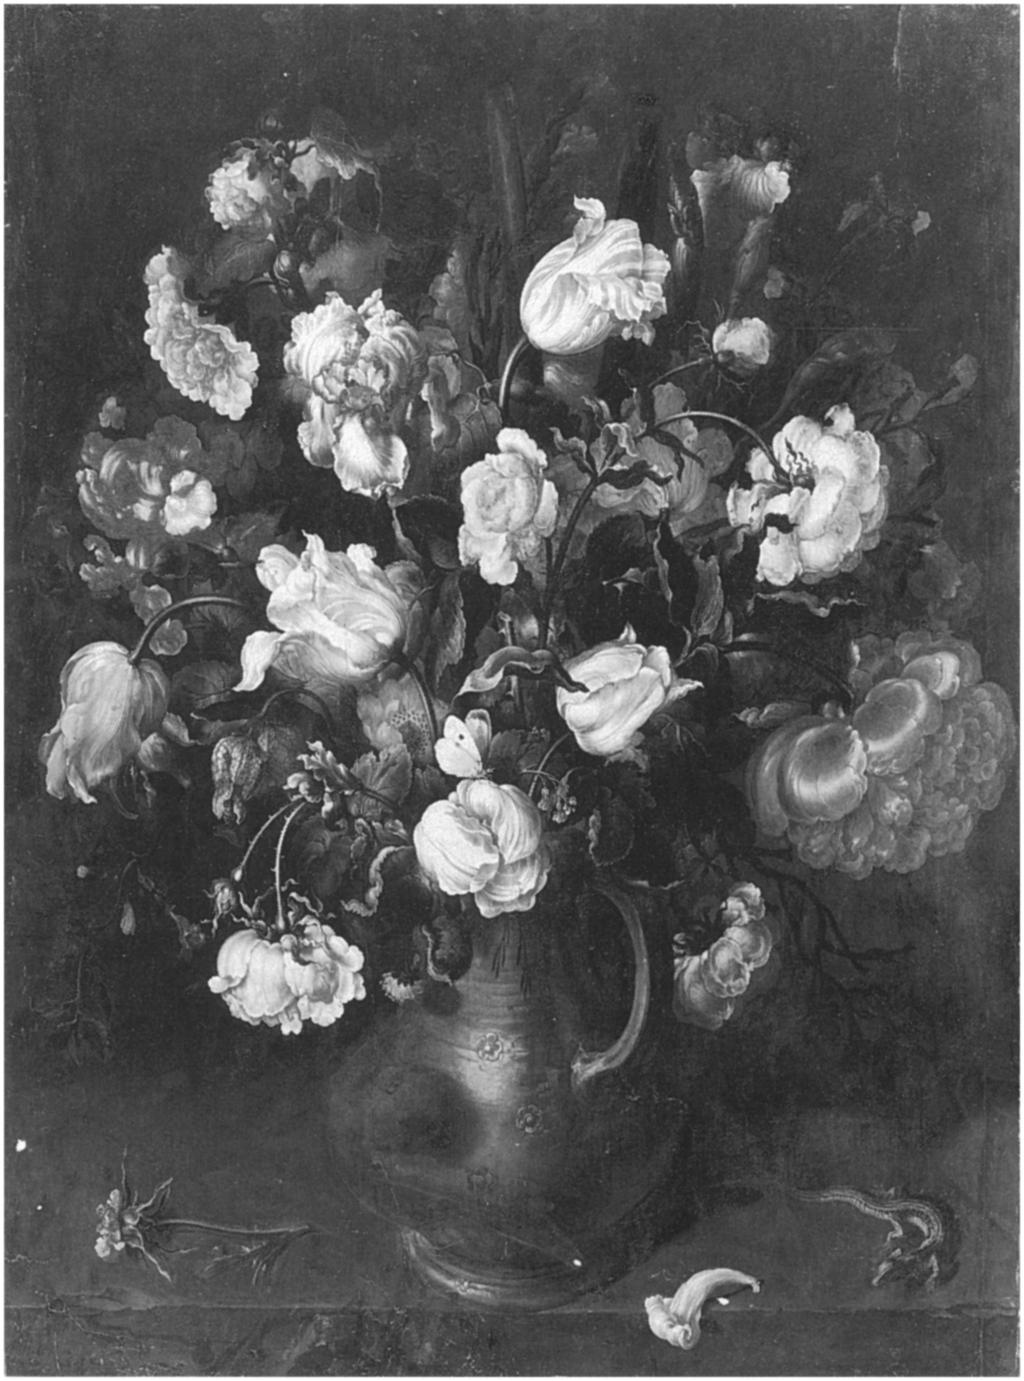 1. Jacob Vosmaer, Dutch, 1584-1641. A Vase with Flowers. Oil on wood, 33/2x 241/2 in. (85 x 62 cm). Purchase, 1871 (71.5). Painting before restoration. doubt included here for their novelty.